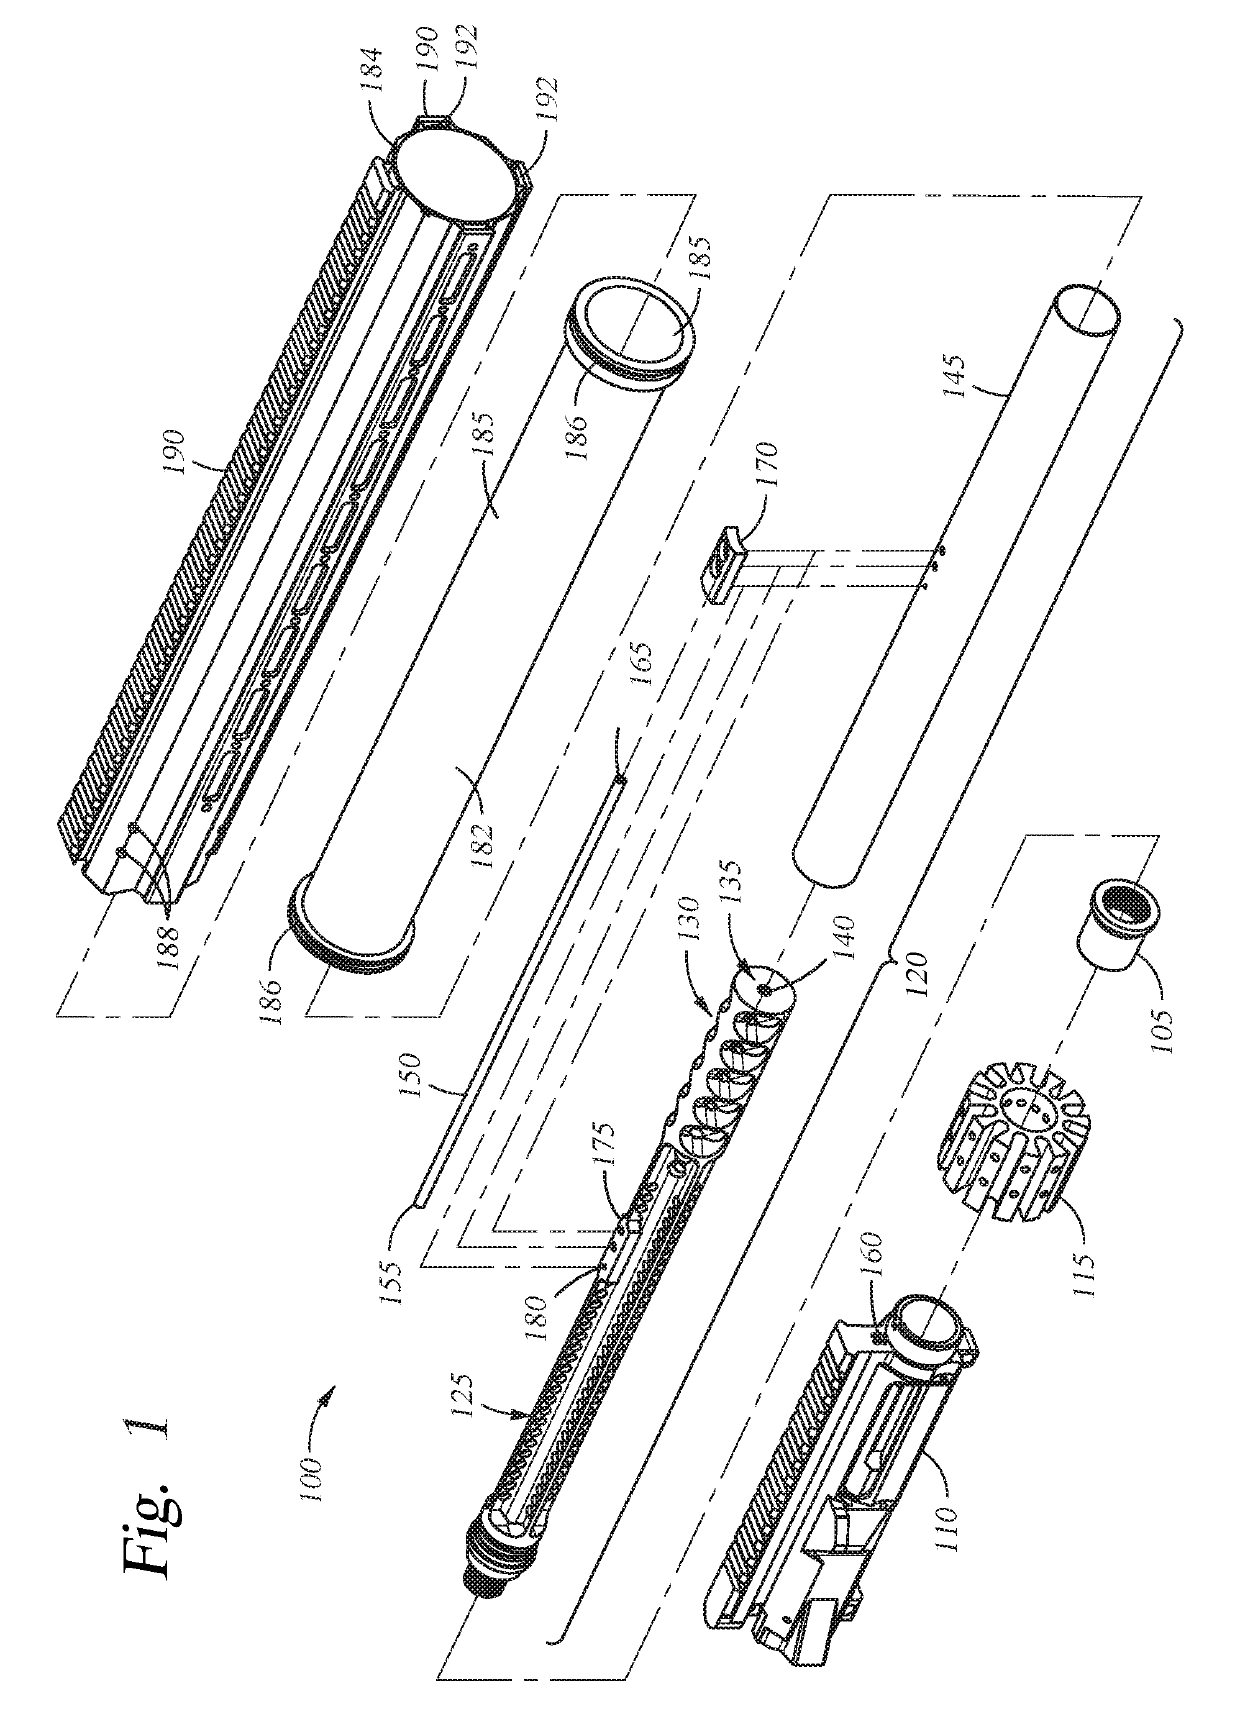 Handguard and barrel assembly with sound suppressor for a firearm